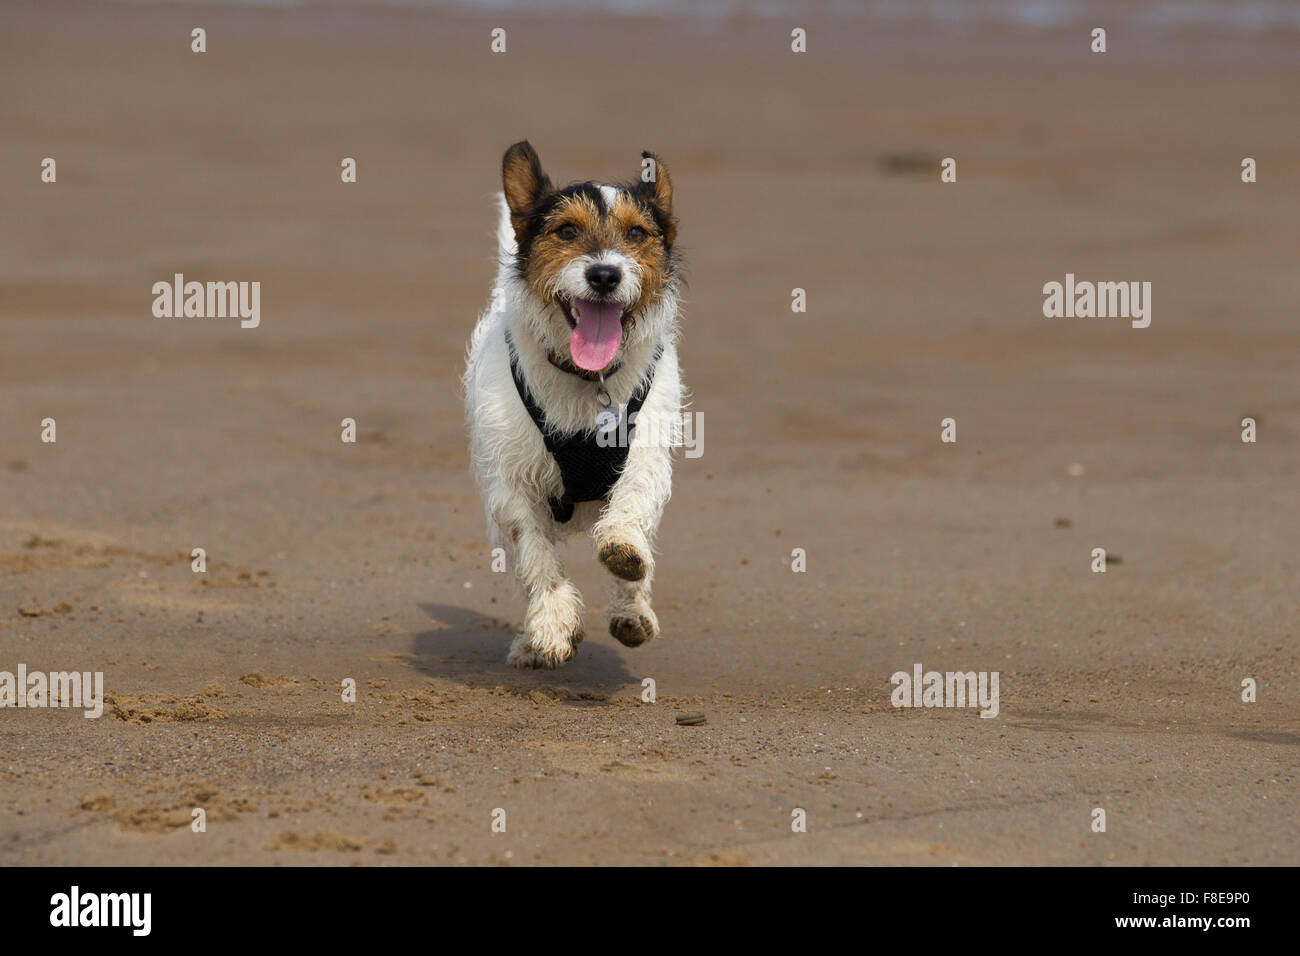 Jack Russell Terrier, small dog, running on beach, Stock Photo